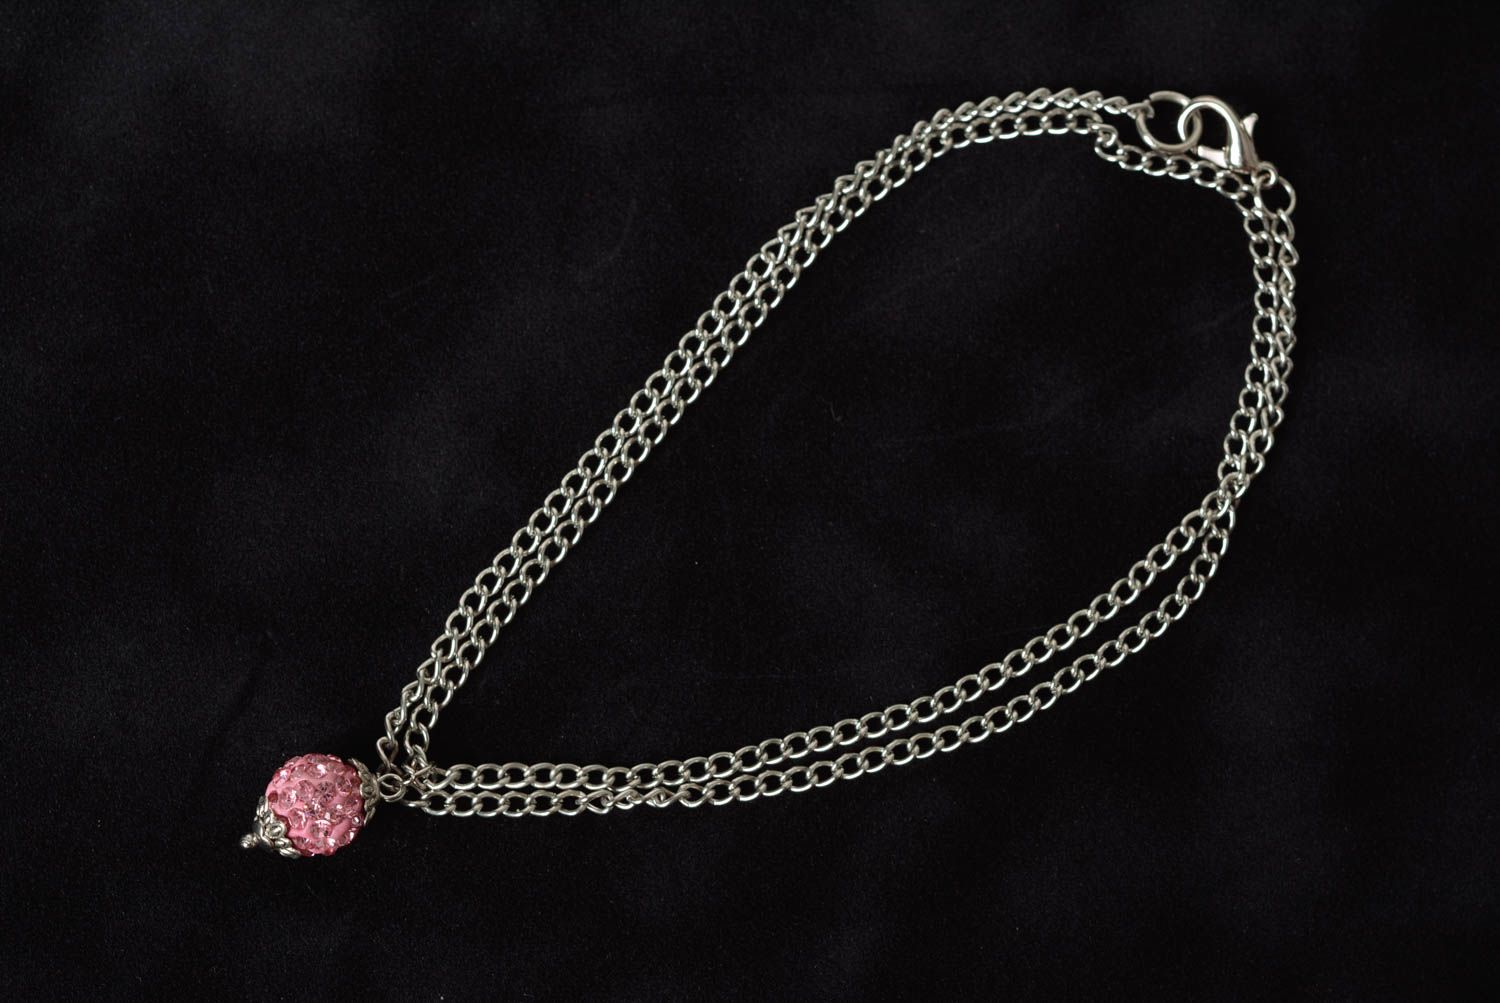 Handmade designer laconic metal chain necklace with pink bead pendant for women photo 1